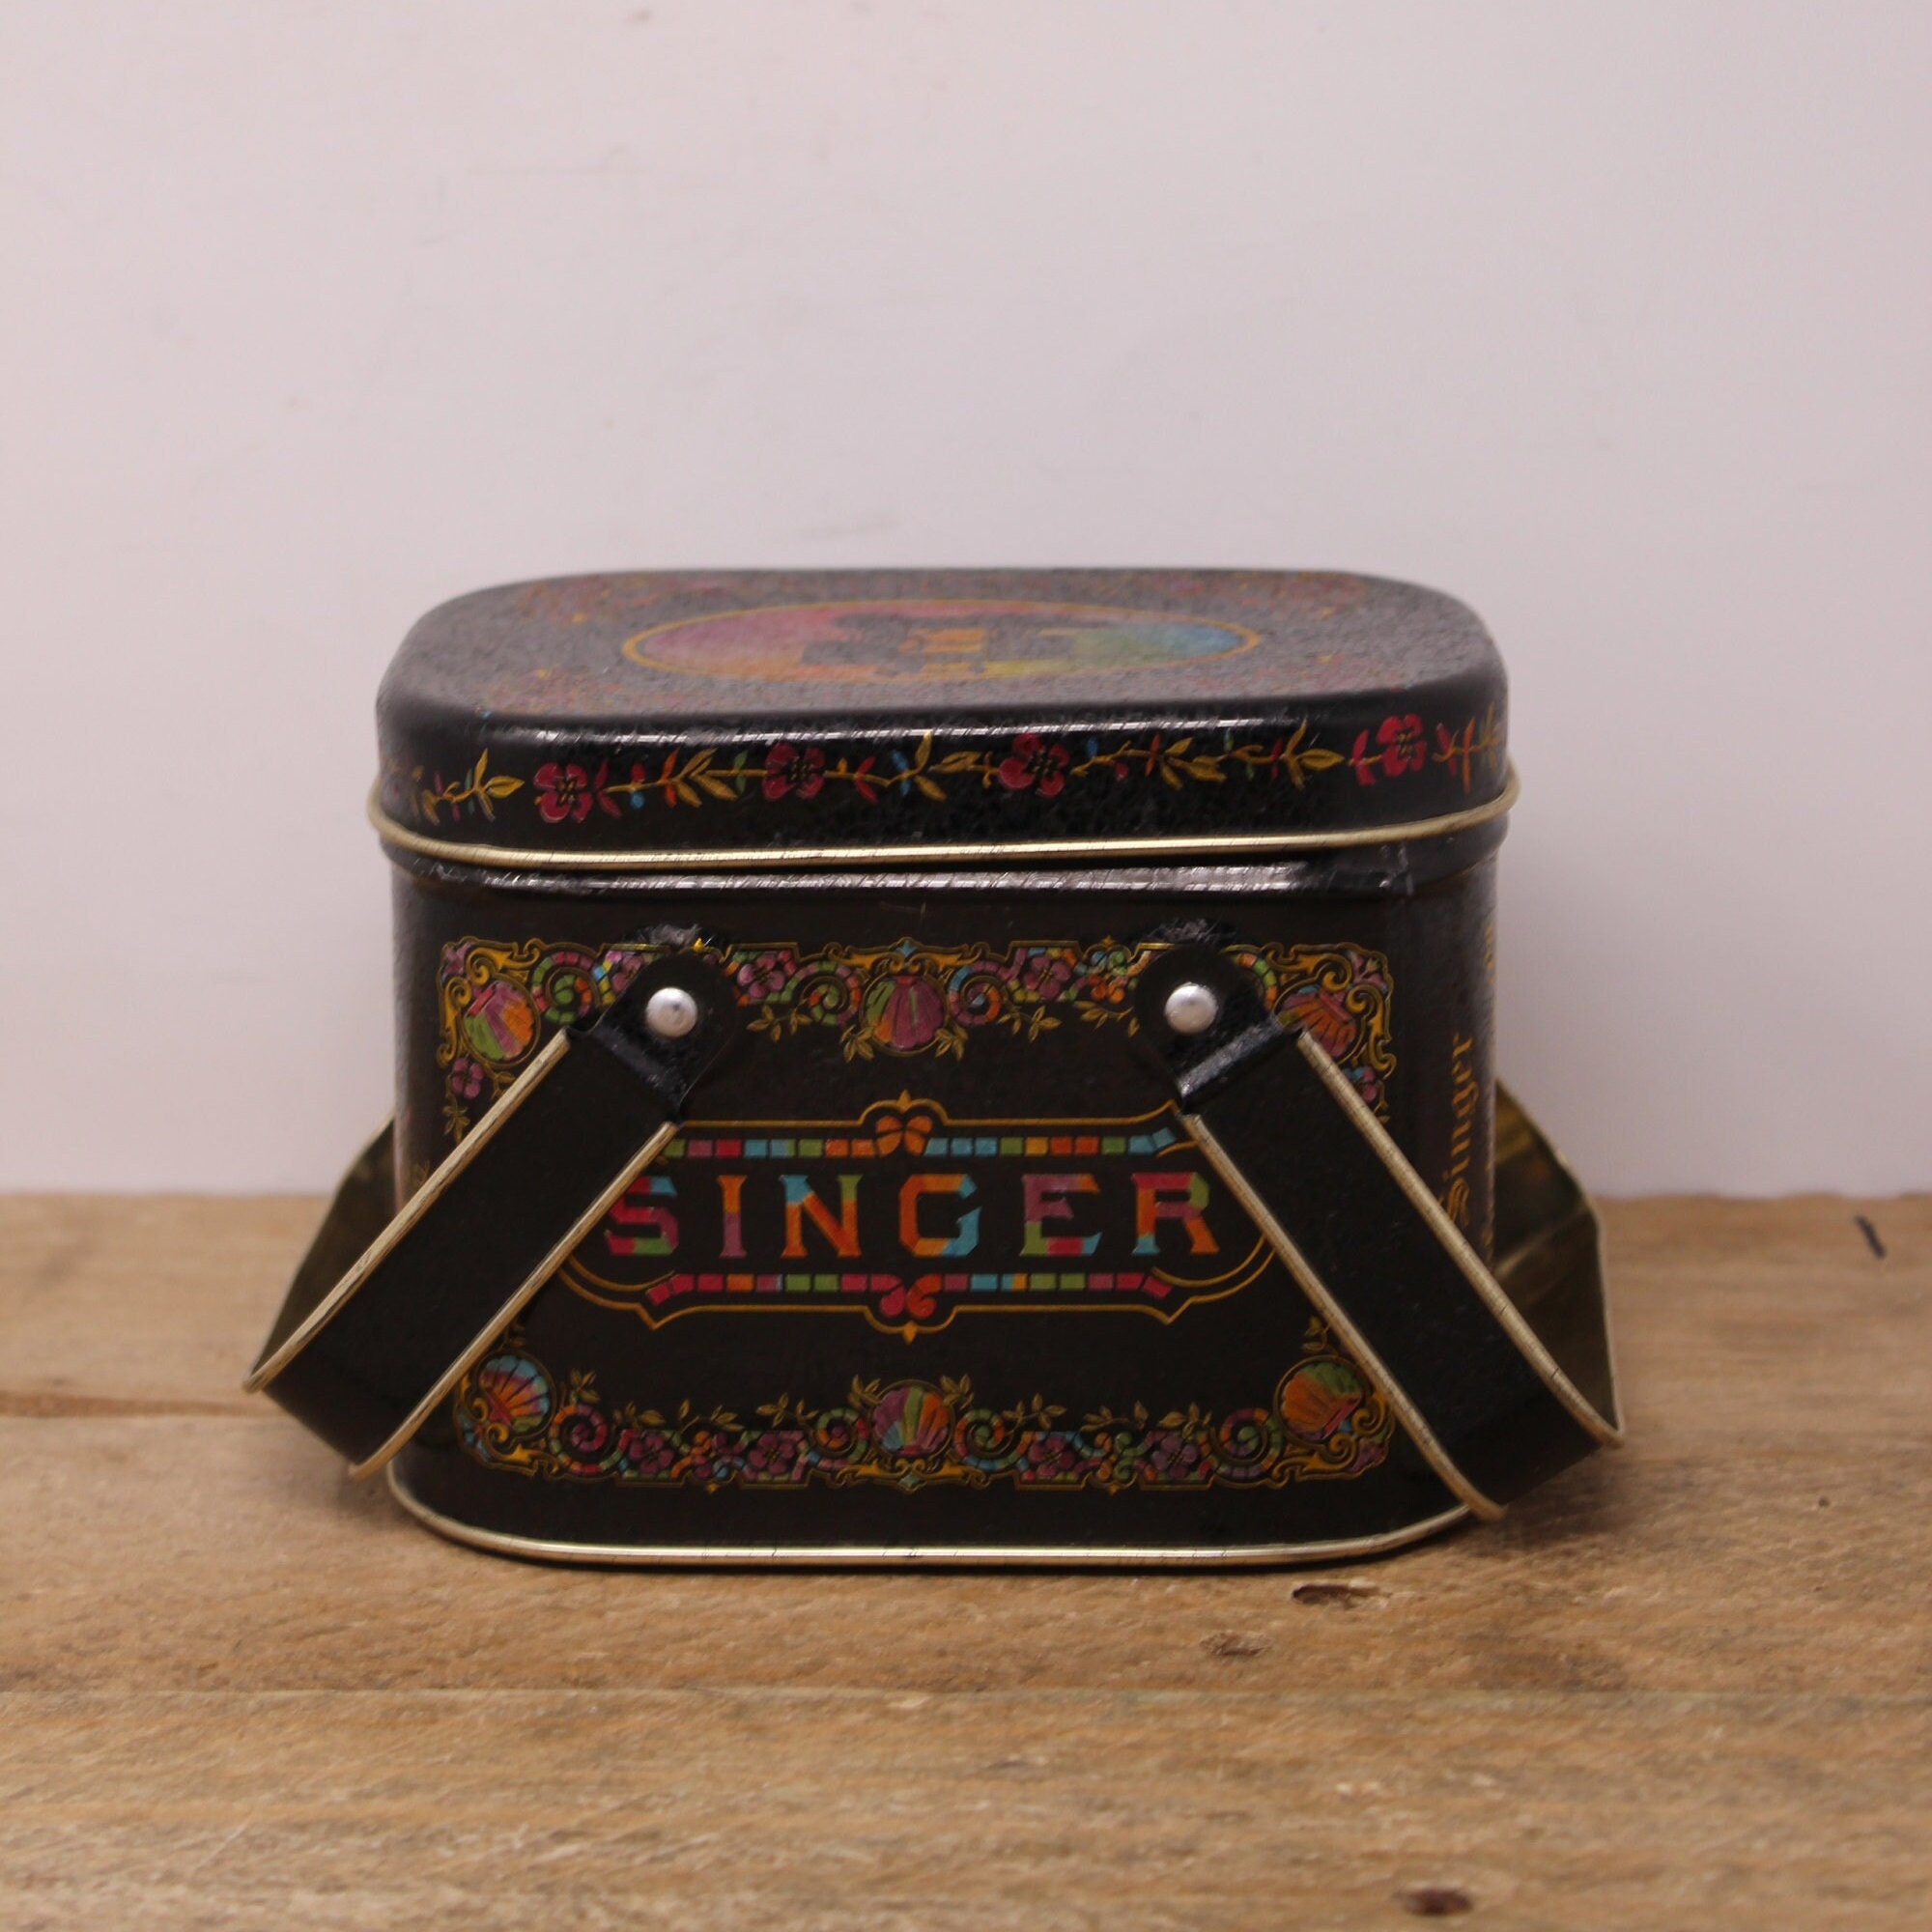 Vintage Singer Sewing Machine Oil Can 1960s 30 Cent Price Missing